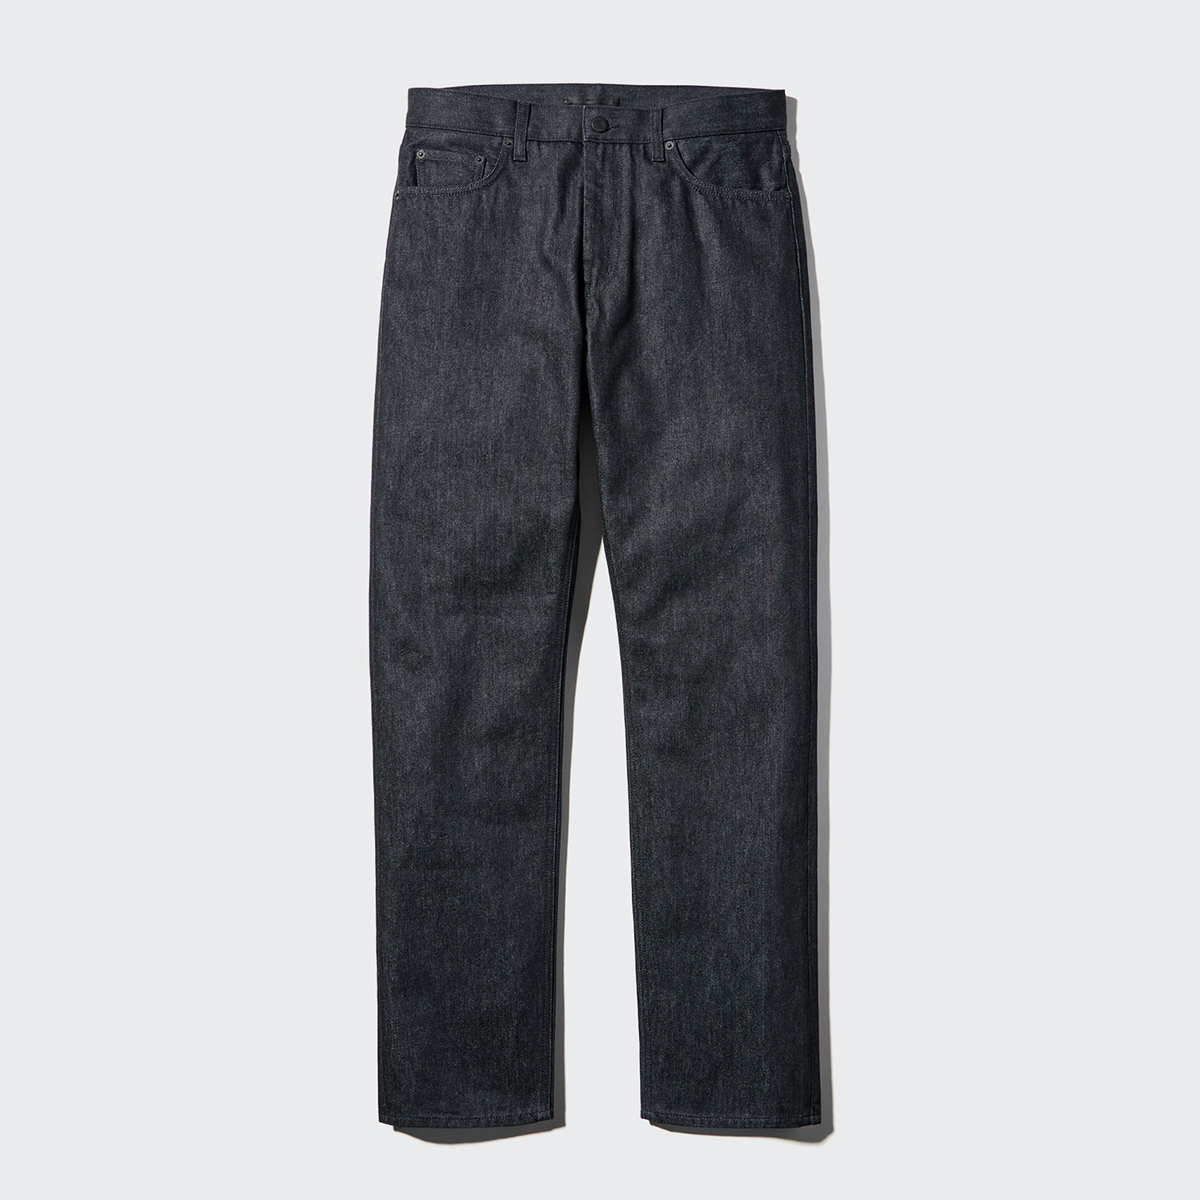 Helmut Lang x Uniqlo: Grail-Level Jeans Are Just $100 Right Now